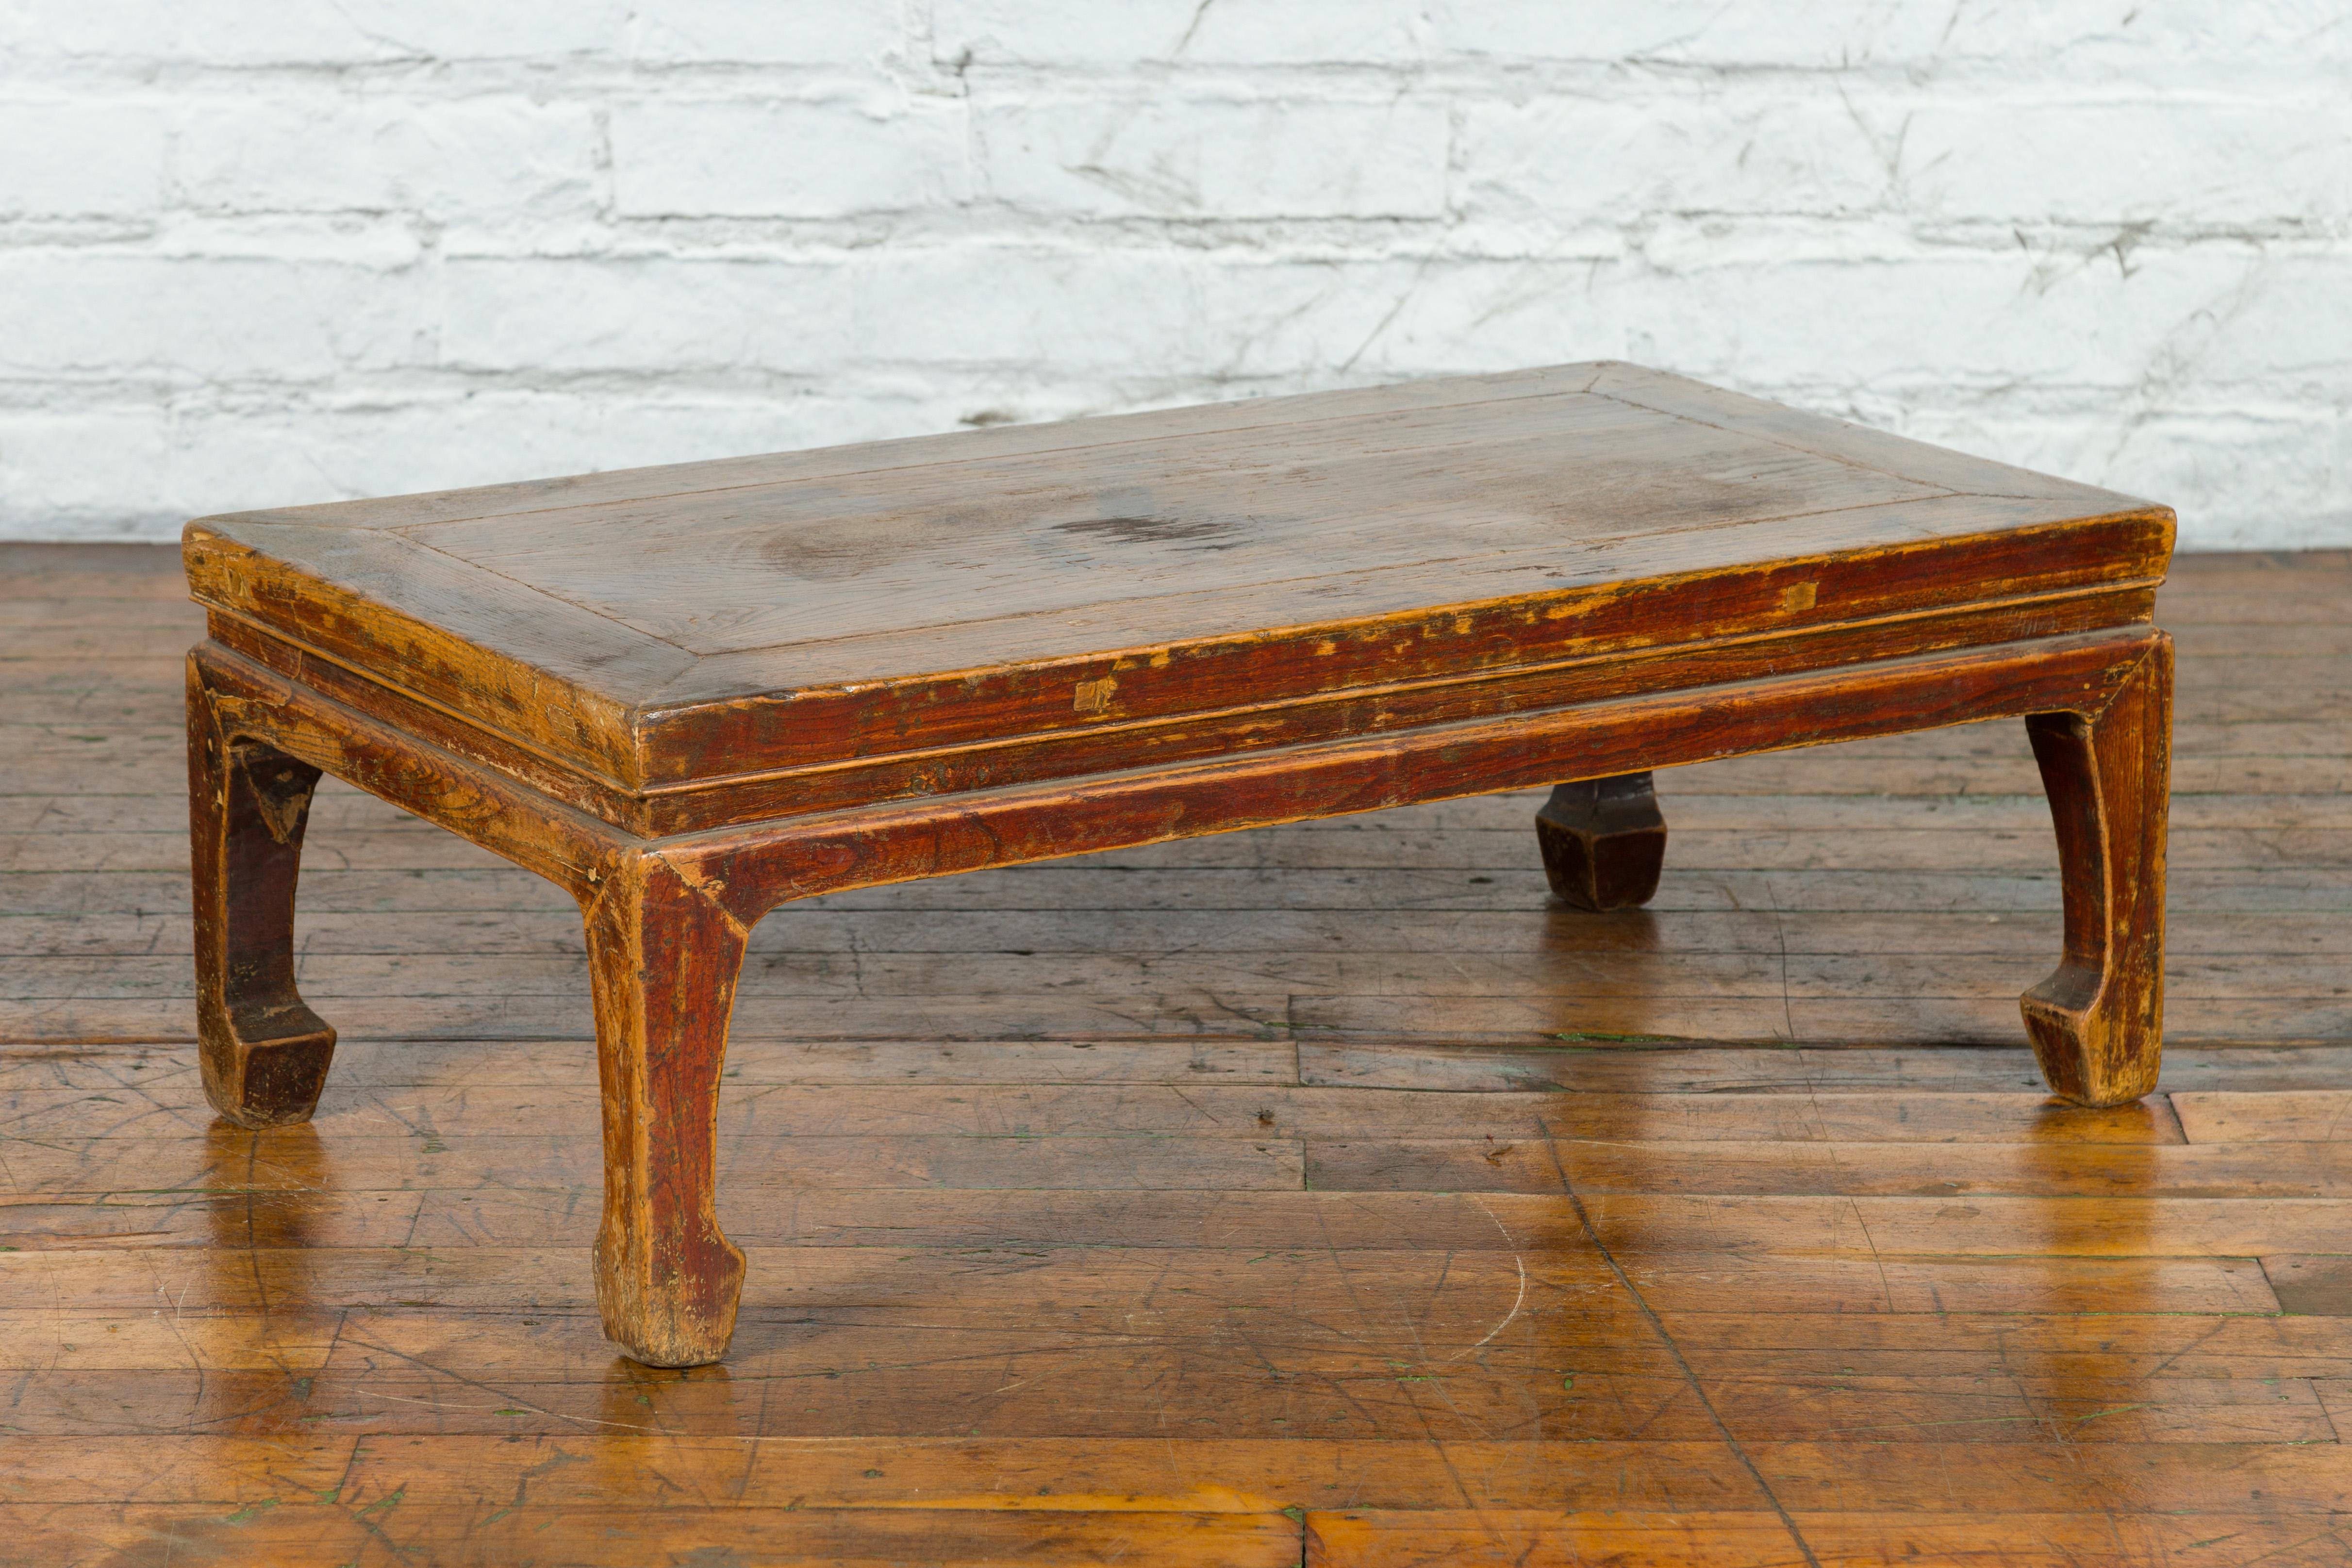 A Chinese Qing Dynasty period low coffee table from the 19th century, with horse hoof legs and distressed patina. Created in China during the Qing Dynasty, this low coffee table features a rectangular waisted top sitting above four short legs with